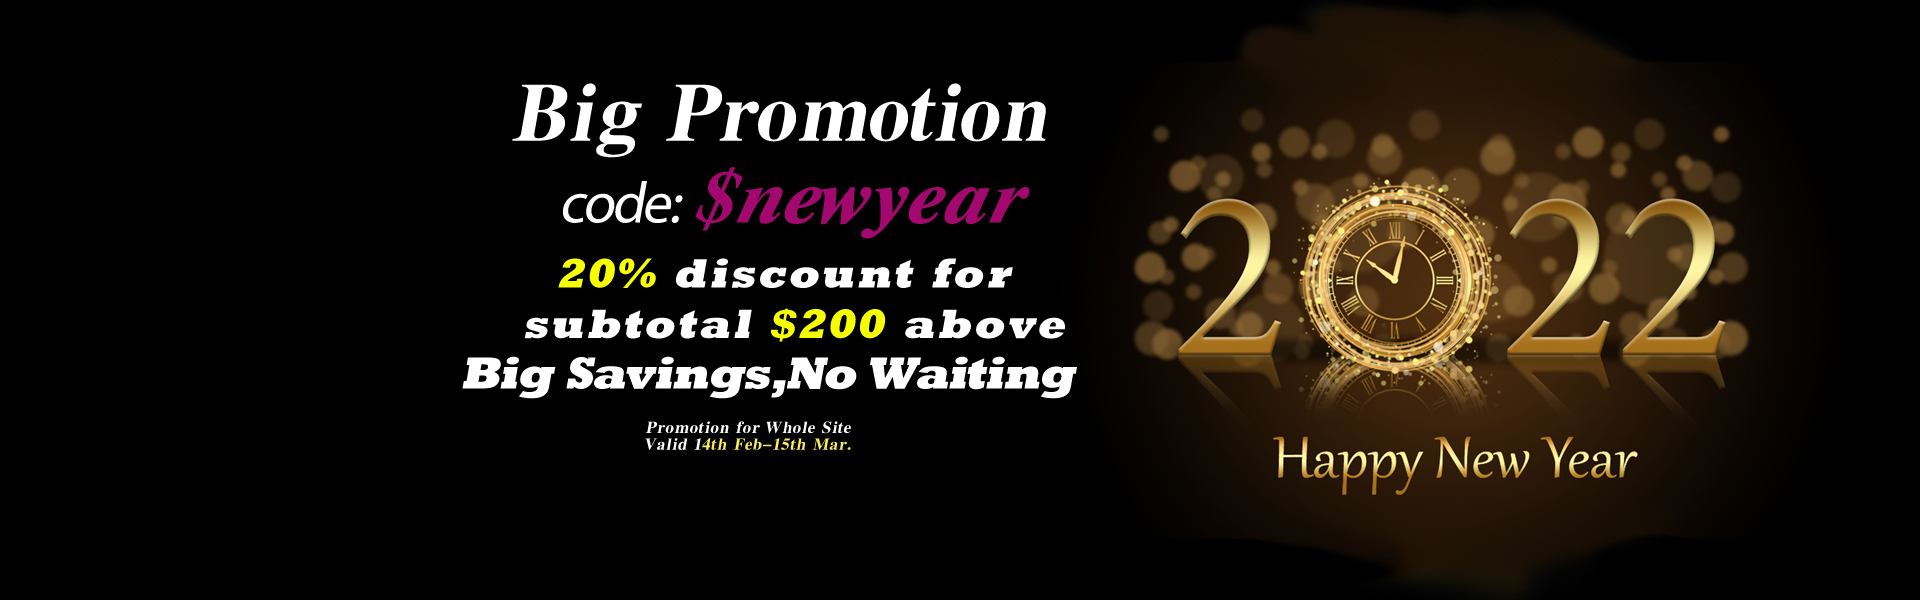 promotion Happy New Year